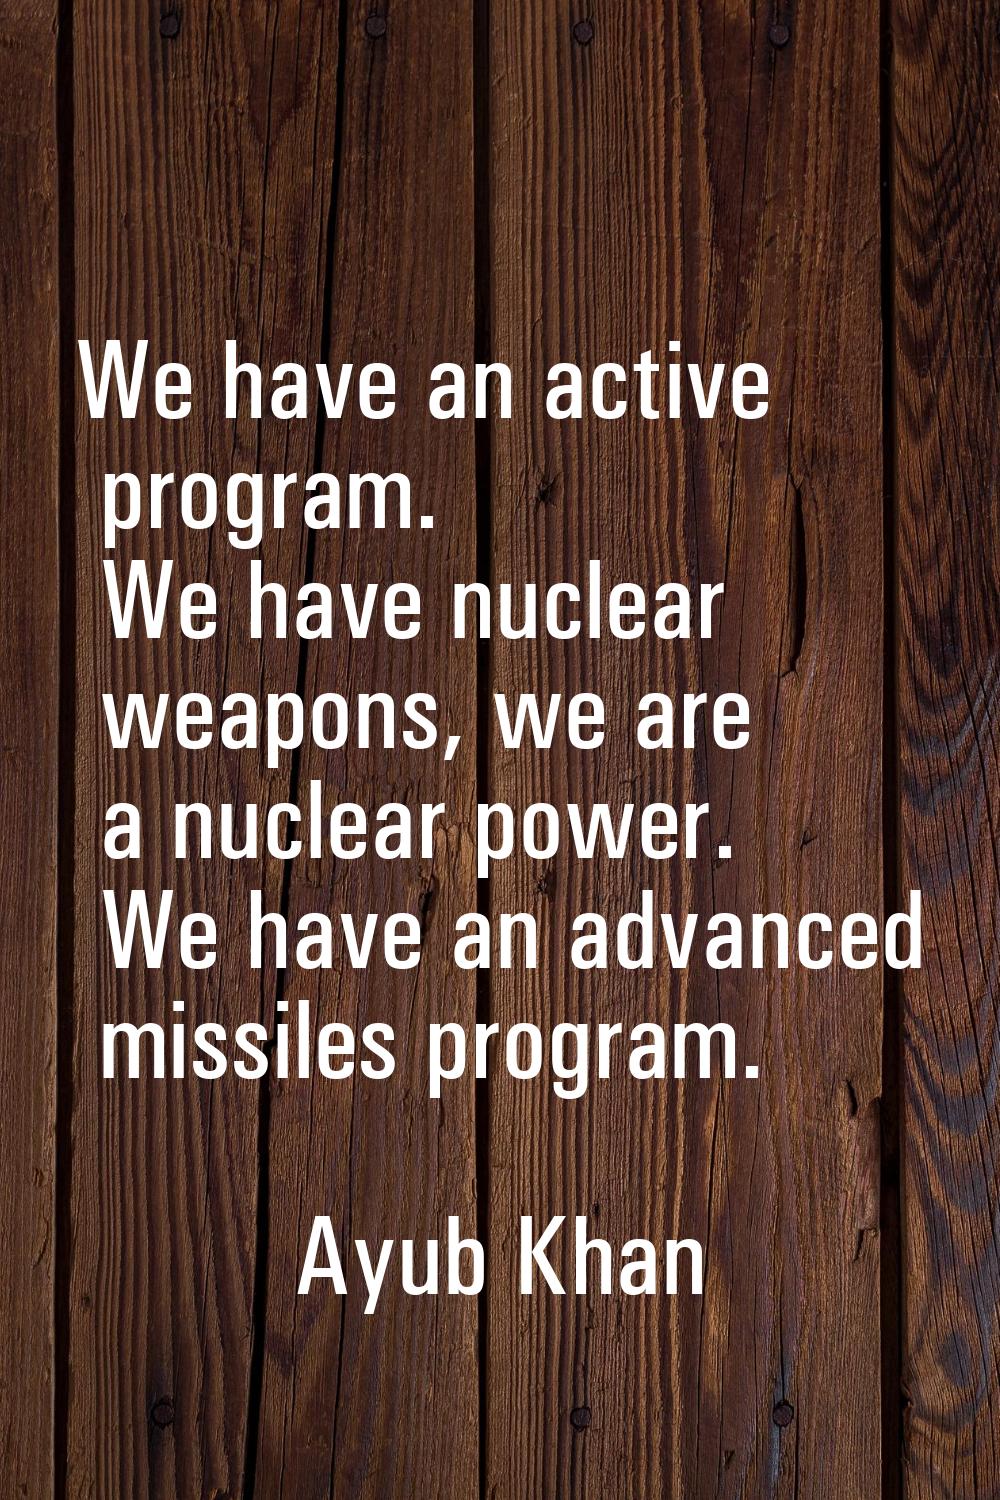 We have an active program. We have nuclear weapons, we are a nuclear power. We have an advanced mis